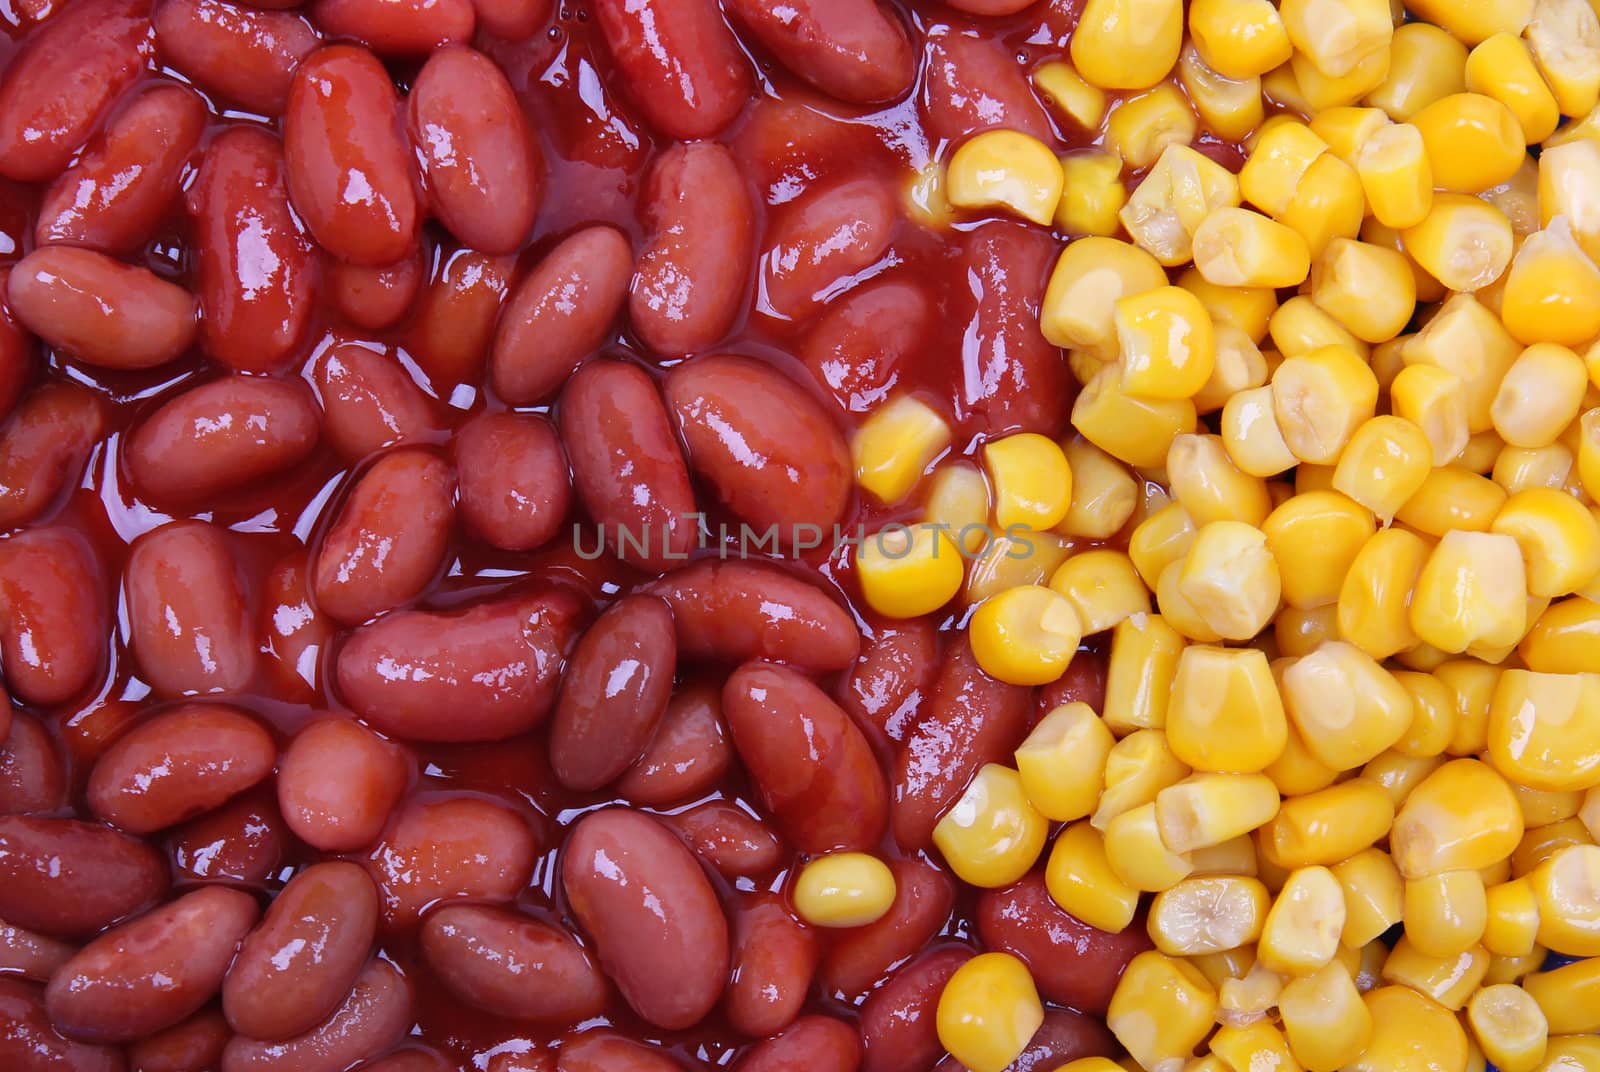 Red string bean in tomato sauce and sweet corn as food backgroun by oxanatravel